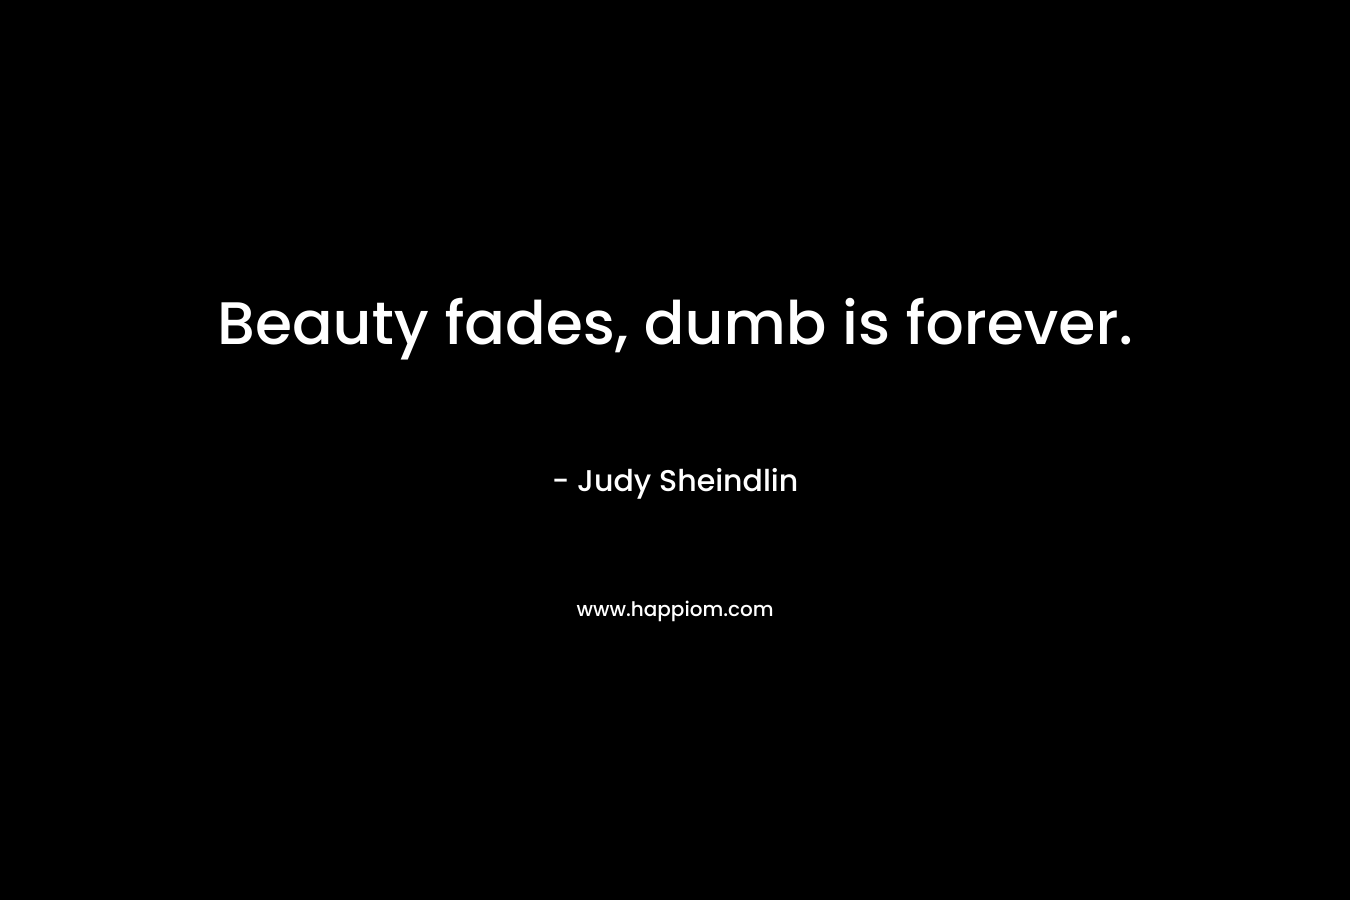 Beauty fades, dumb is forever.